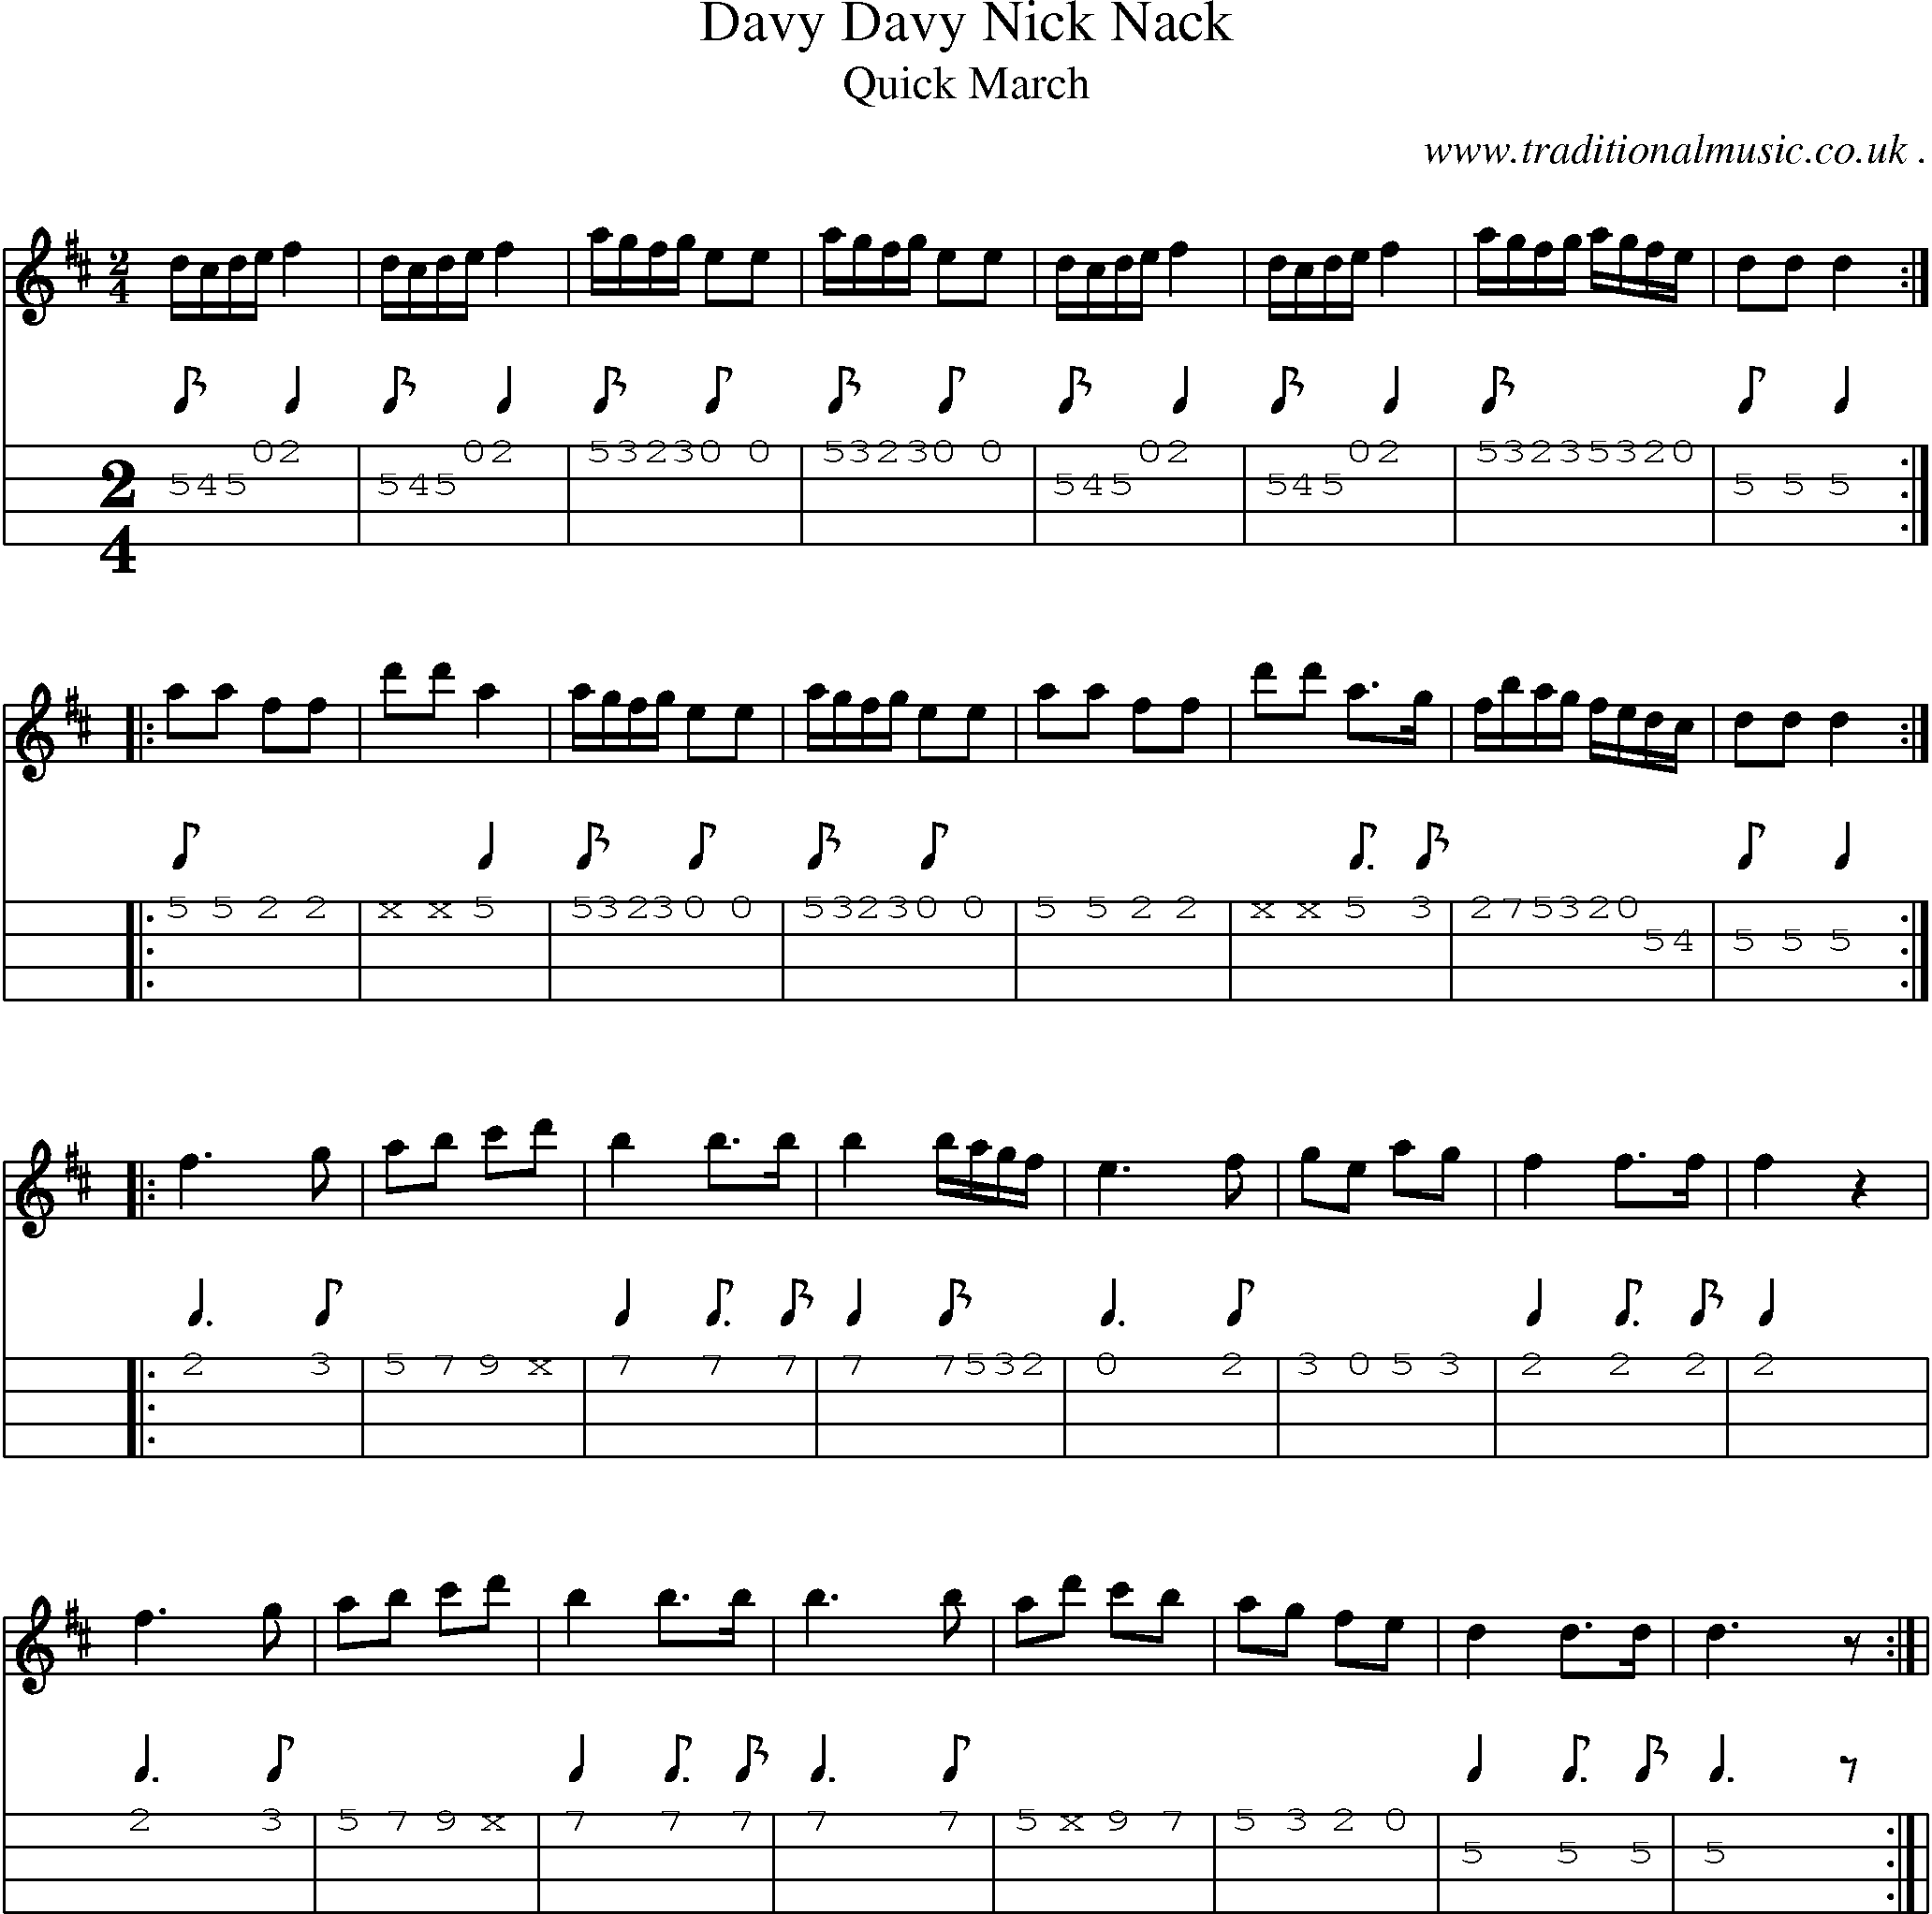 Sheet-Music and Mandolin Tabs for Davy Davy Nick Nack